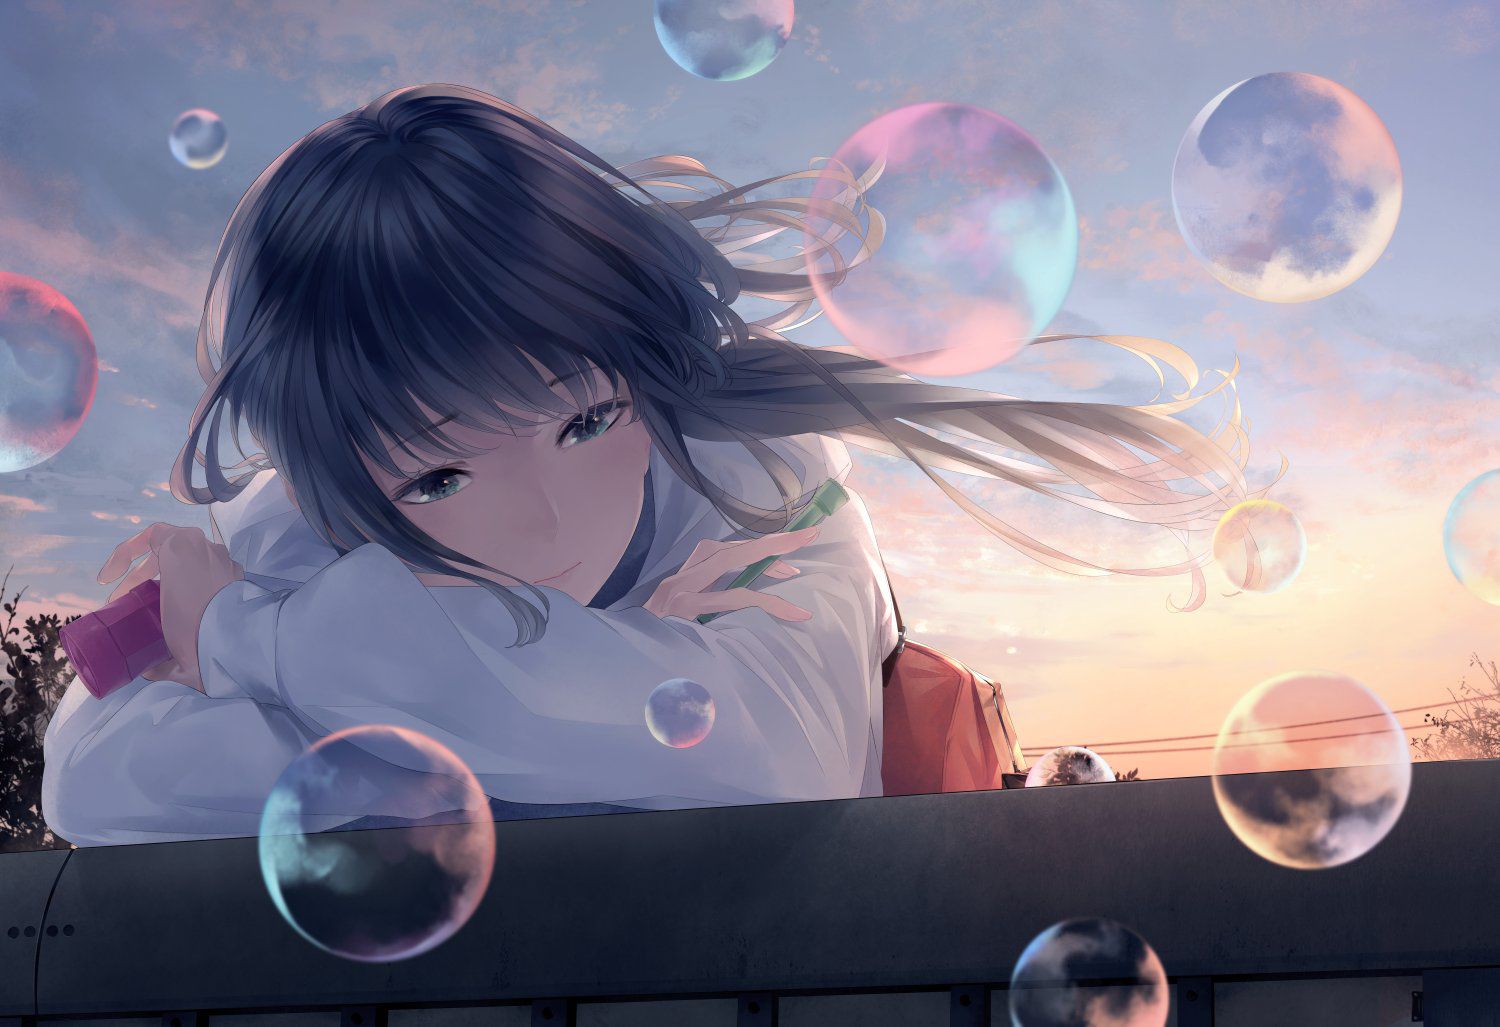 100+] Bubble Anime Wallpapers